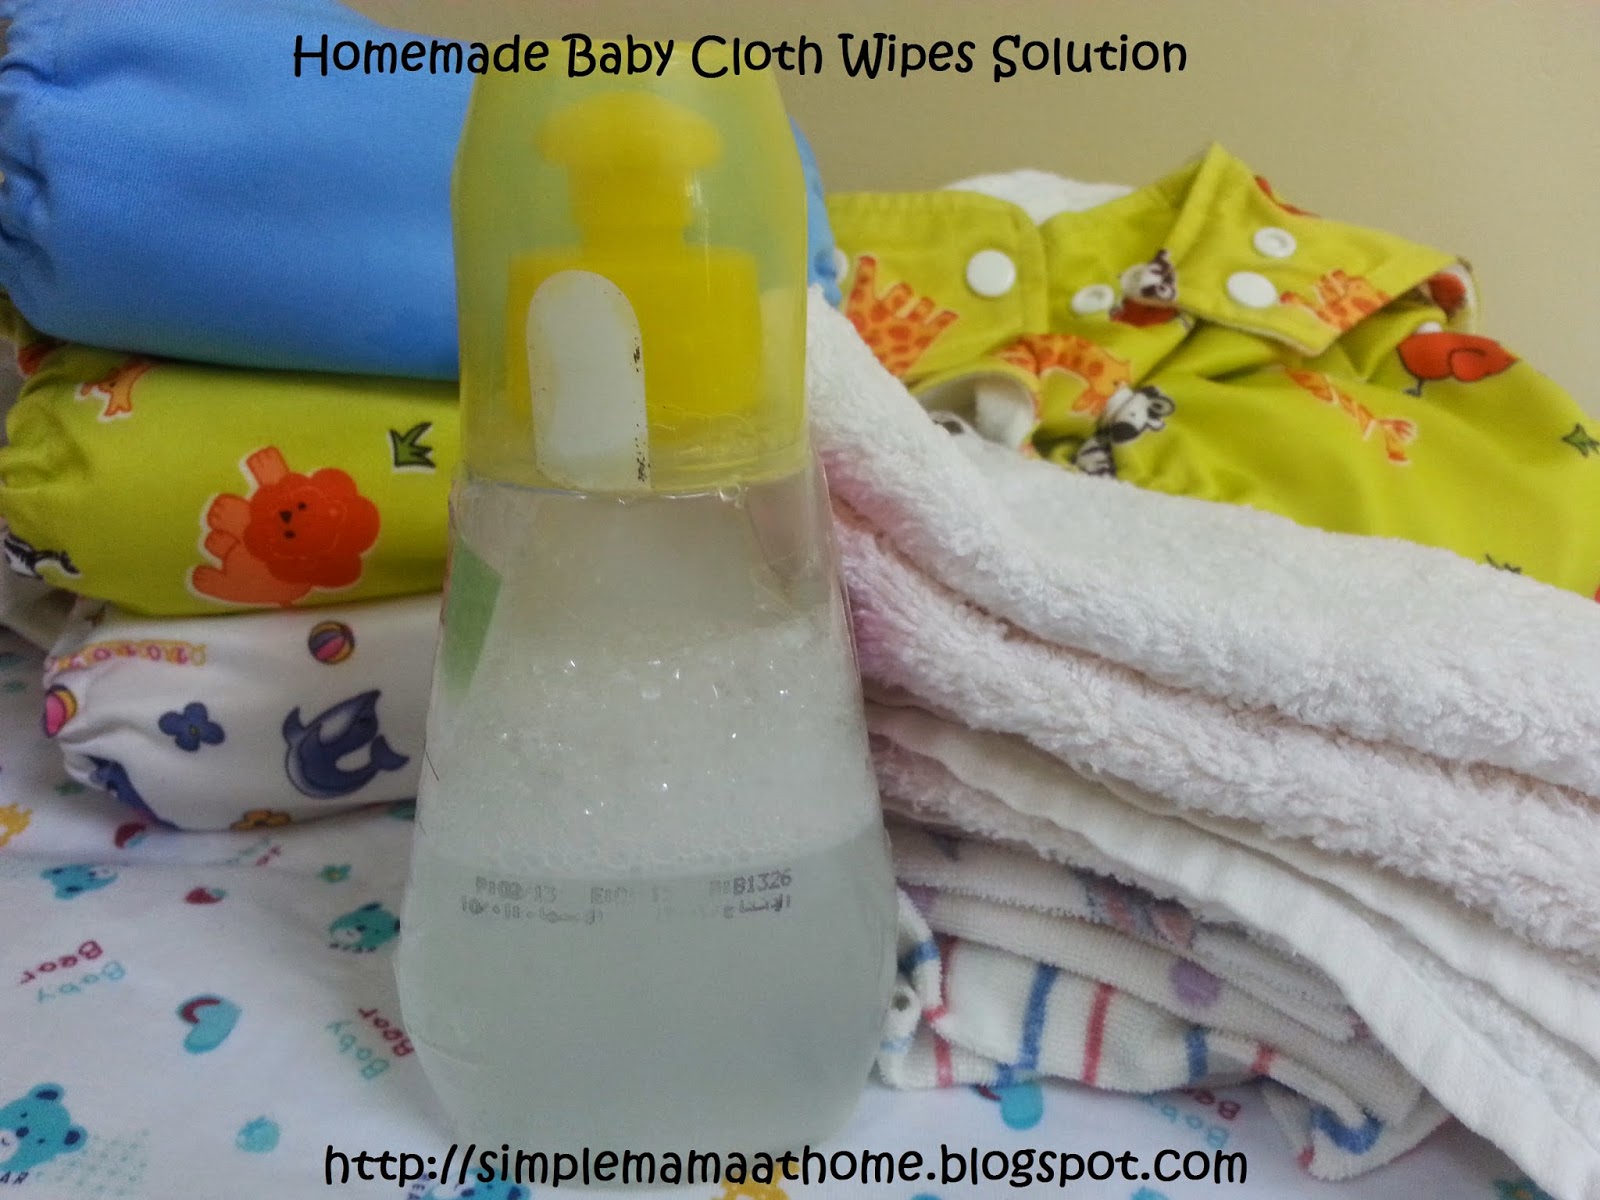 Homemade Baby Cloth Wipes Solution